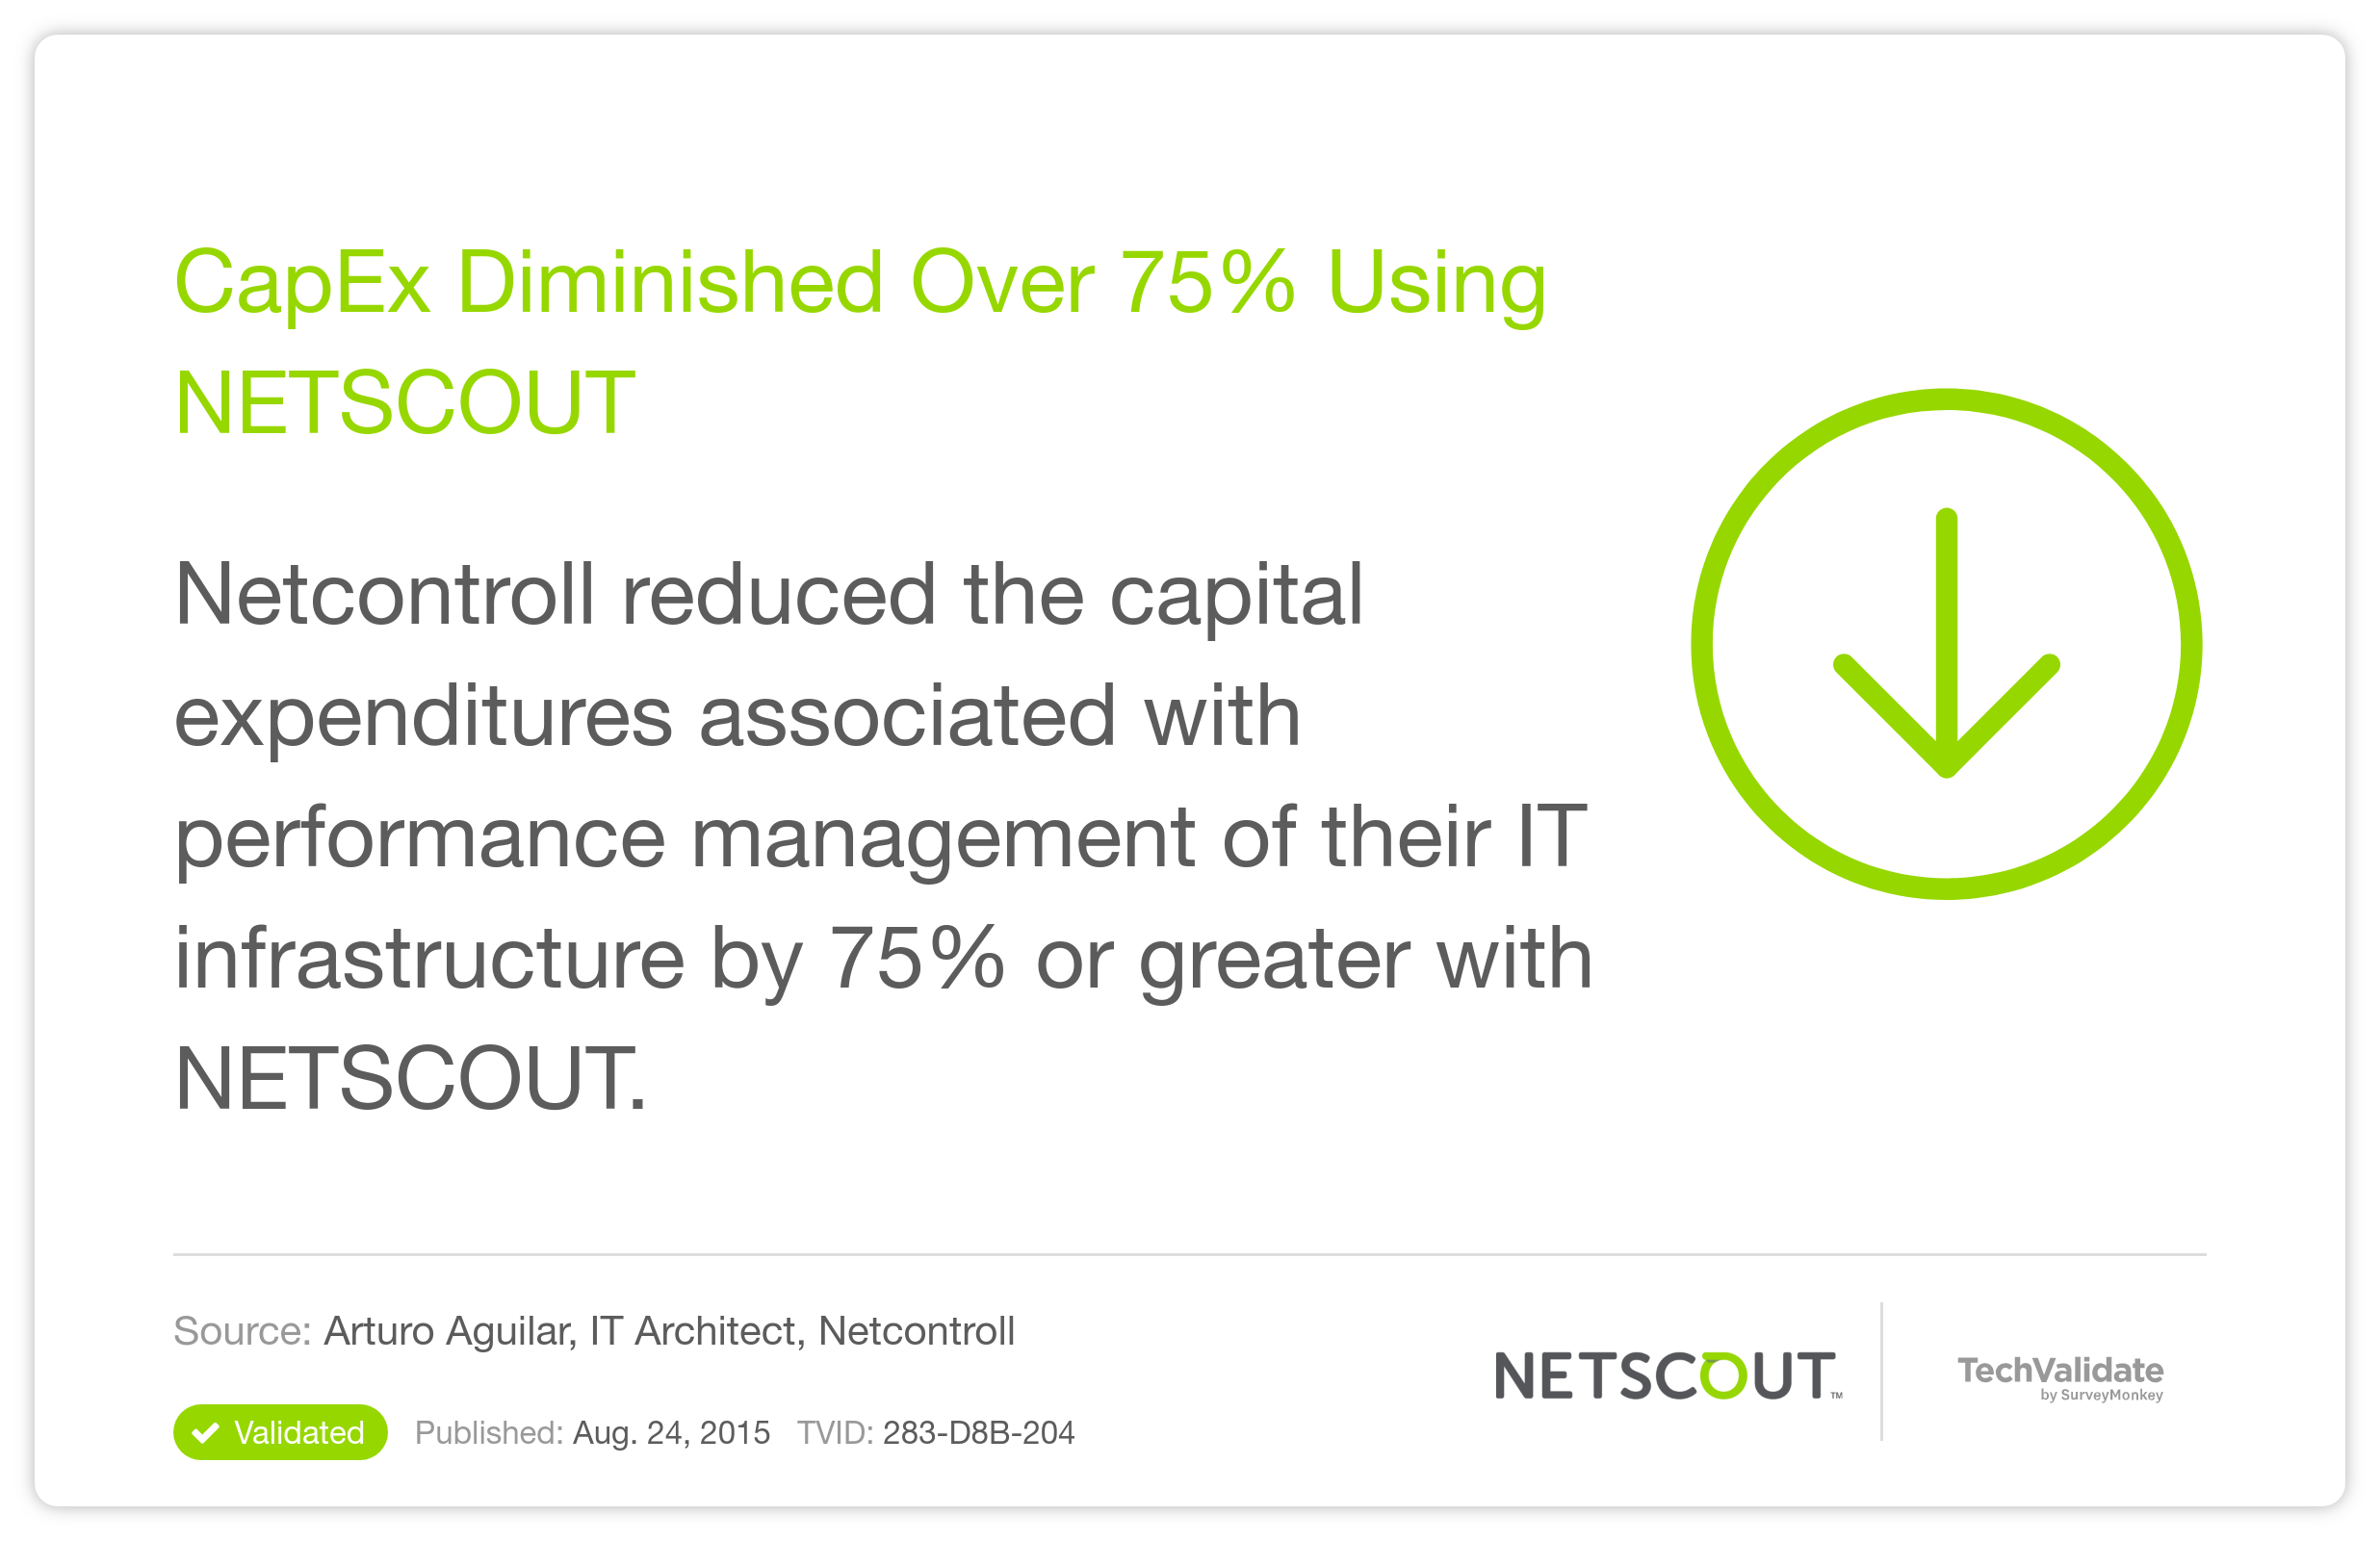 CapEx Diminished Over 75% Using NETSCOUT